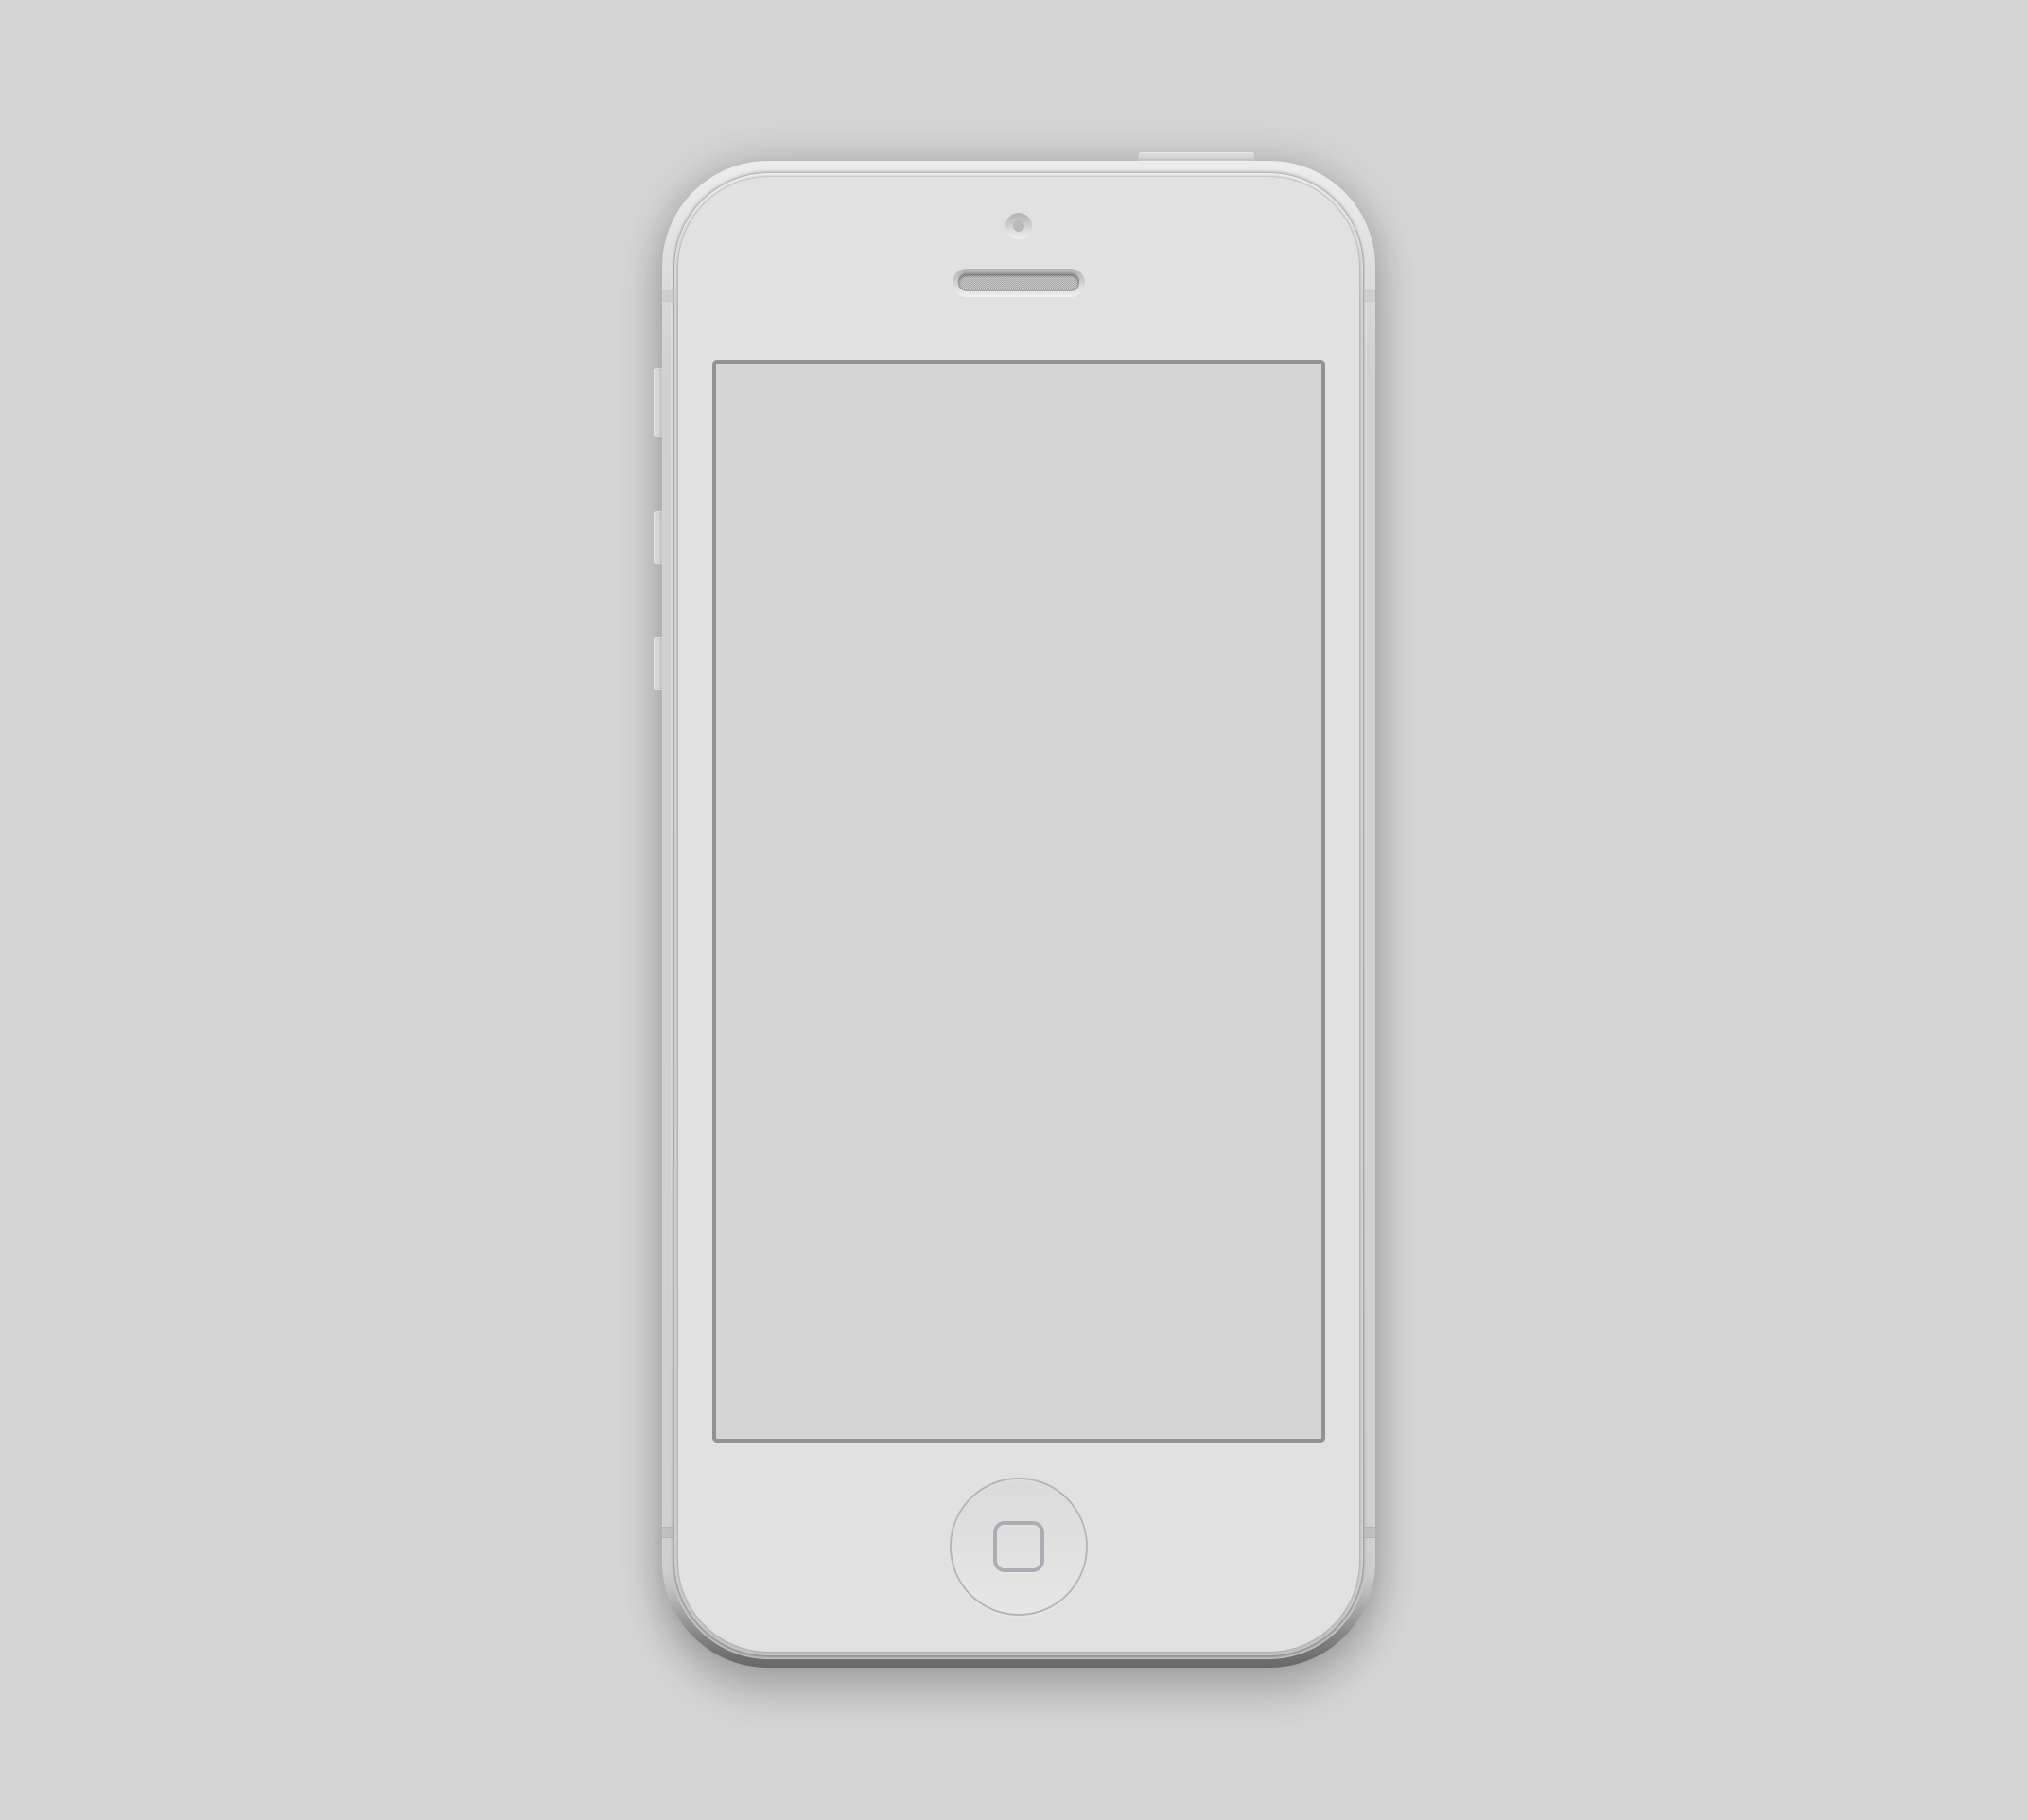 Download iPhone 5 Mockup PSD - Free Photoshop PSD Files | psdKing